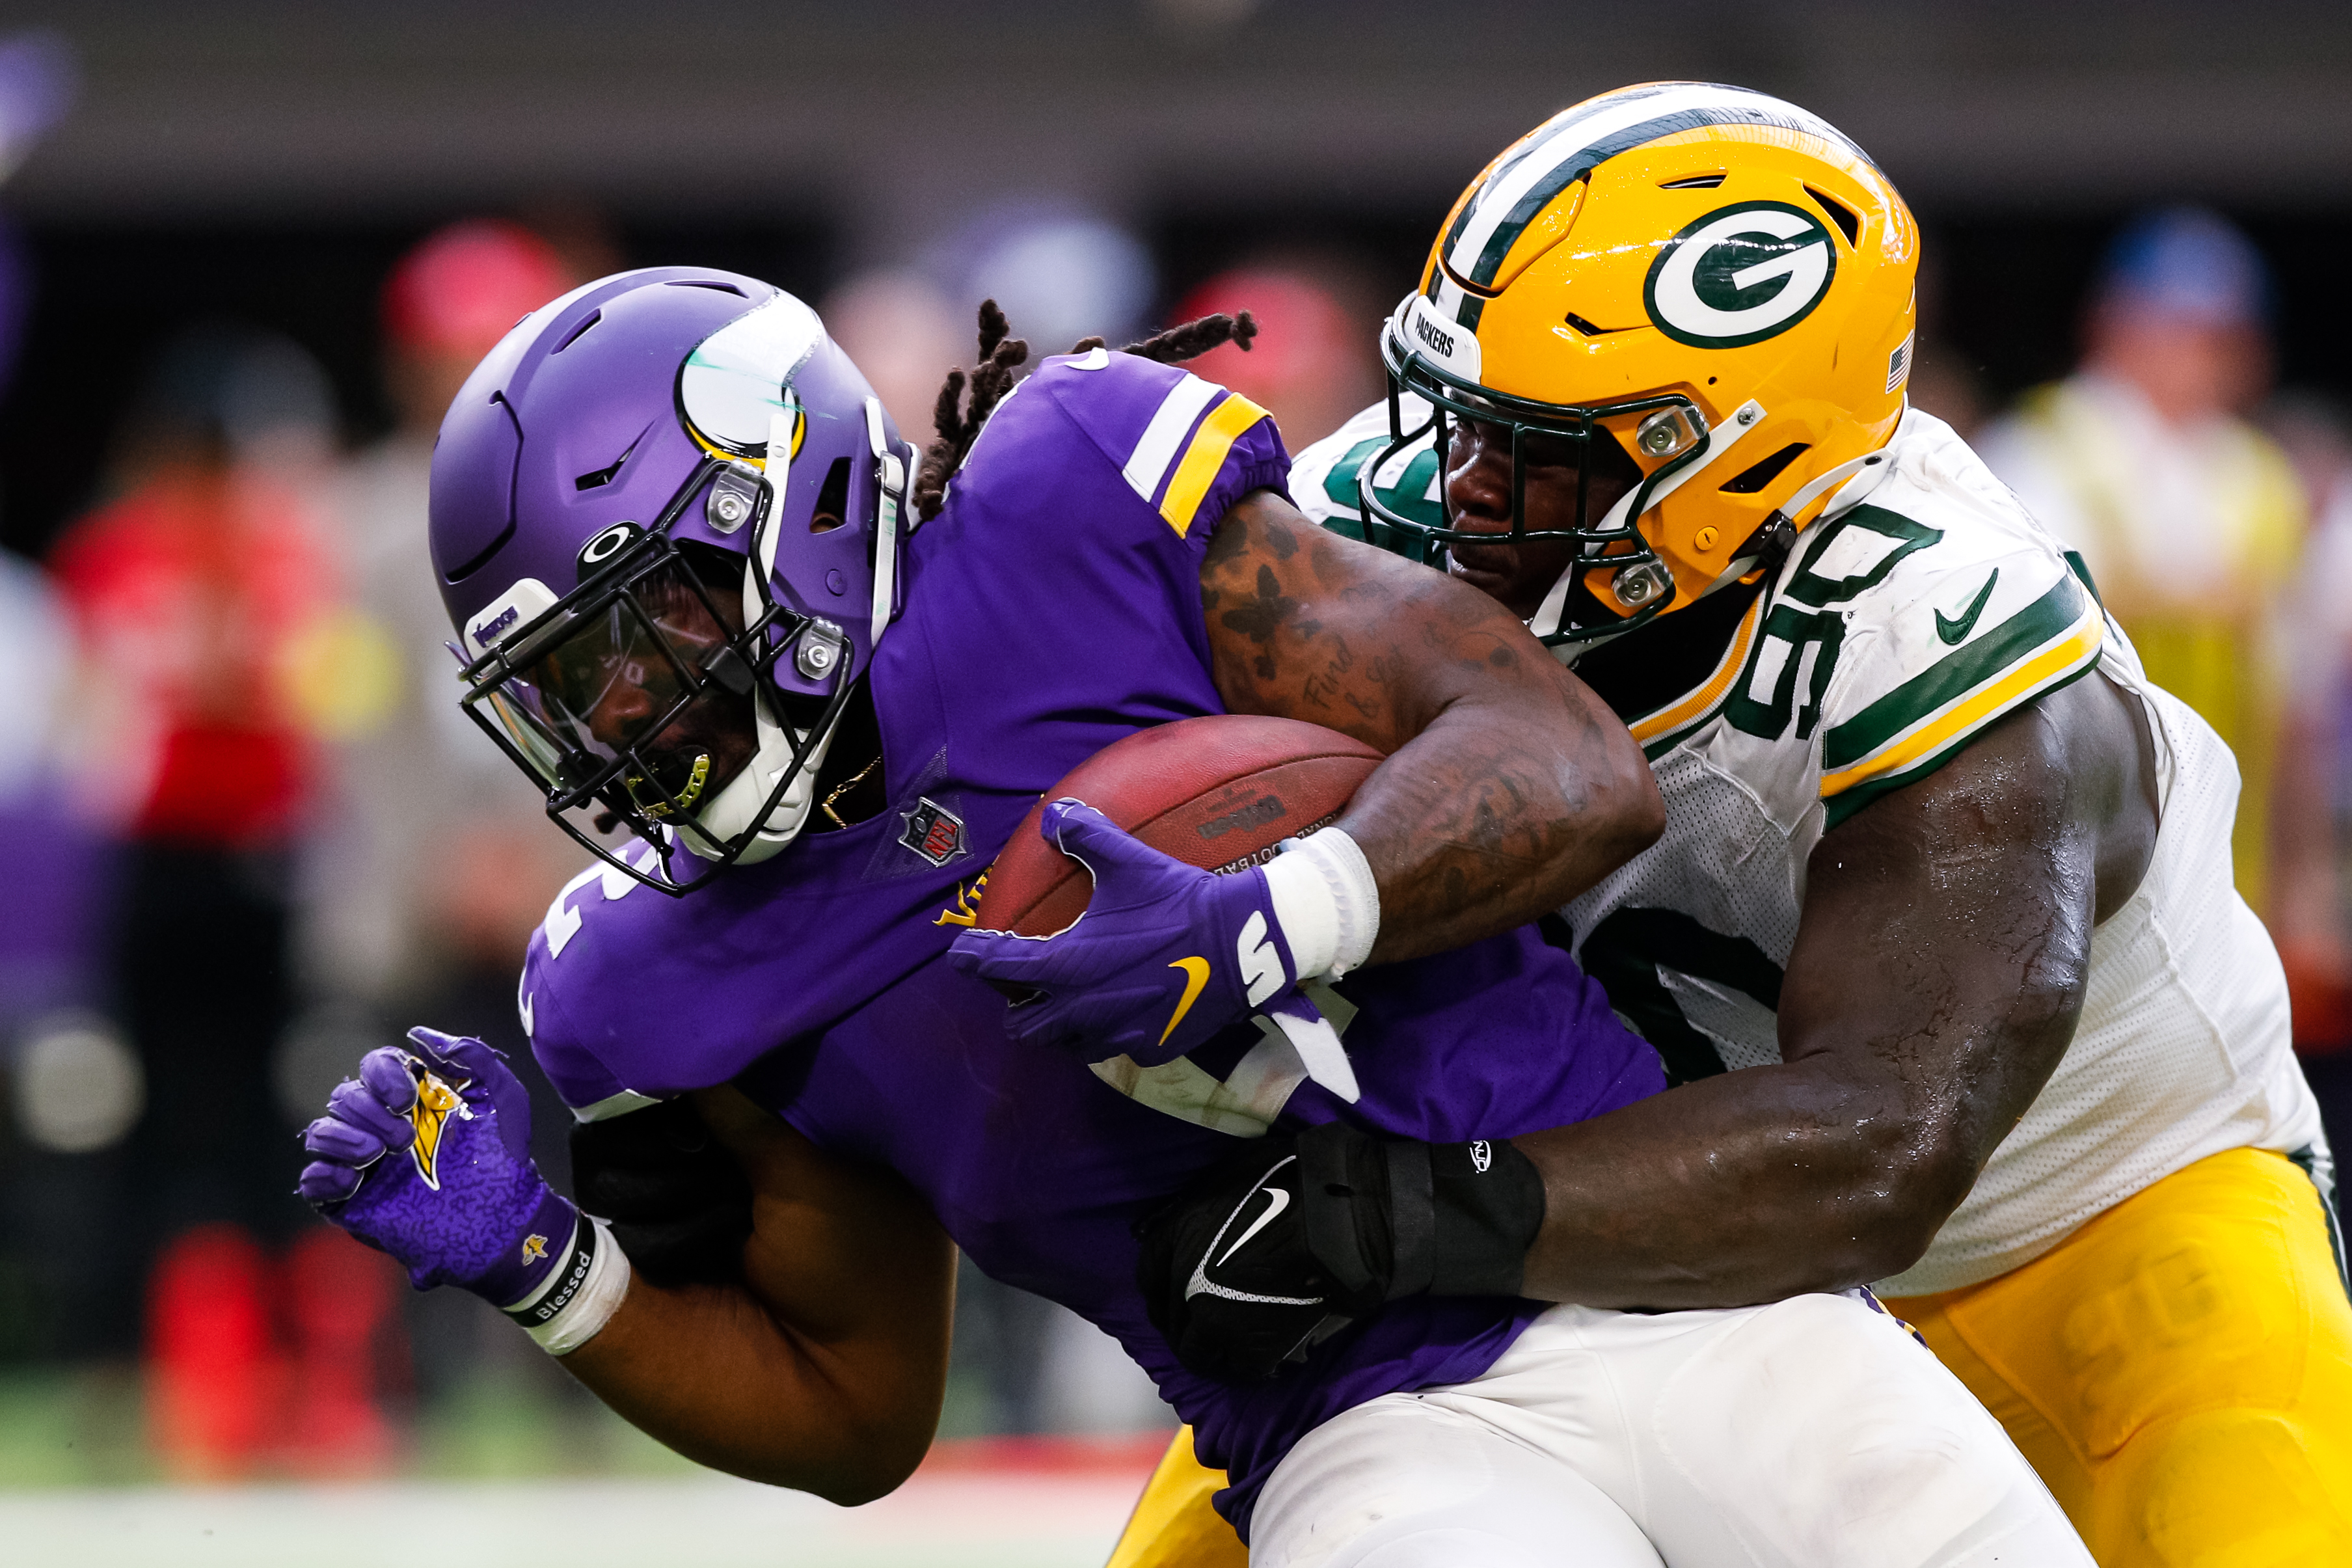 Alexander Mattison #2 of the Minnesota Vikings is tackled by Jarran Reed #90 of the Green Bay Packers in the fourth quarter of the game at U.S. Bank Stadium on September 11, 2022 in Minneapolis, Minnesota. The Vikings defeated the Packers 23-7.